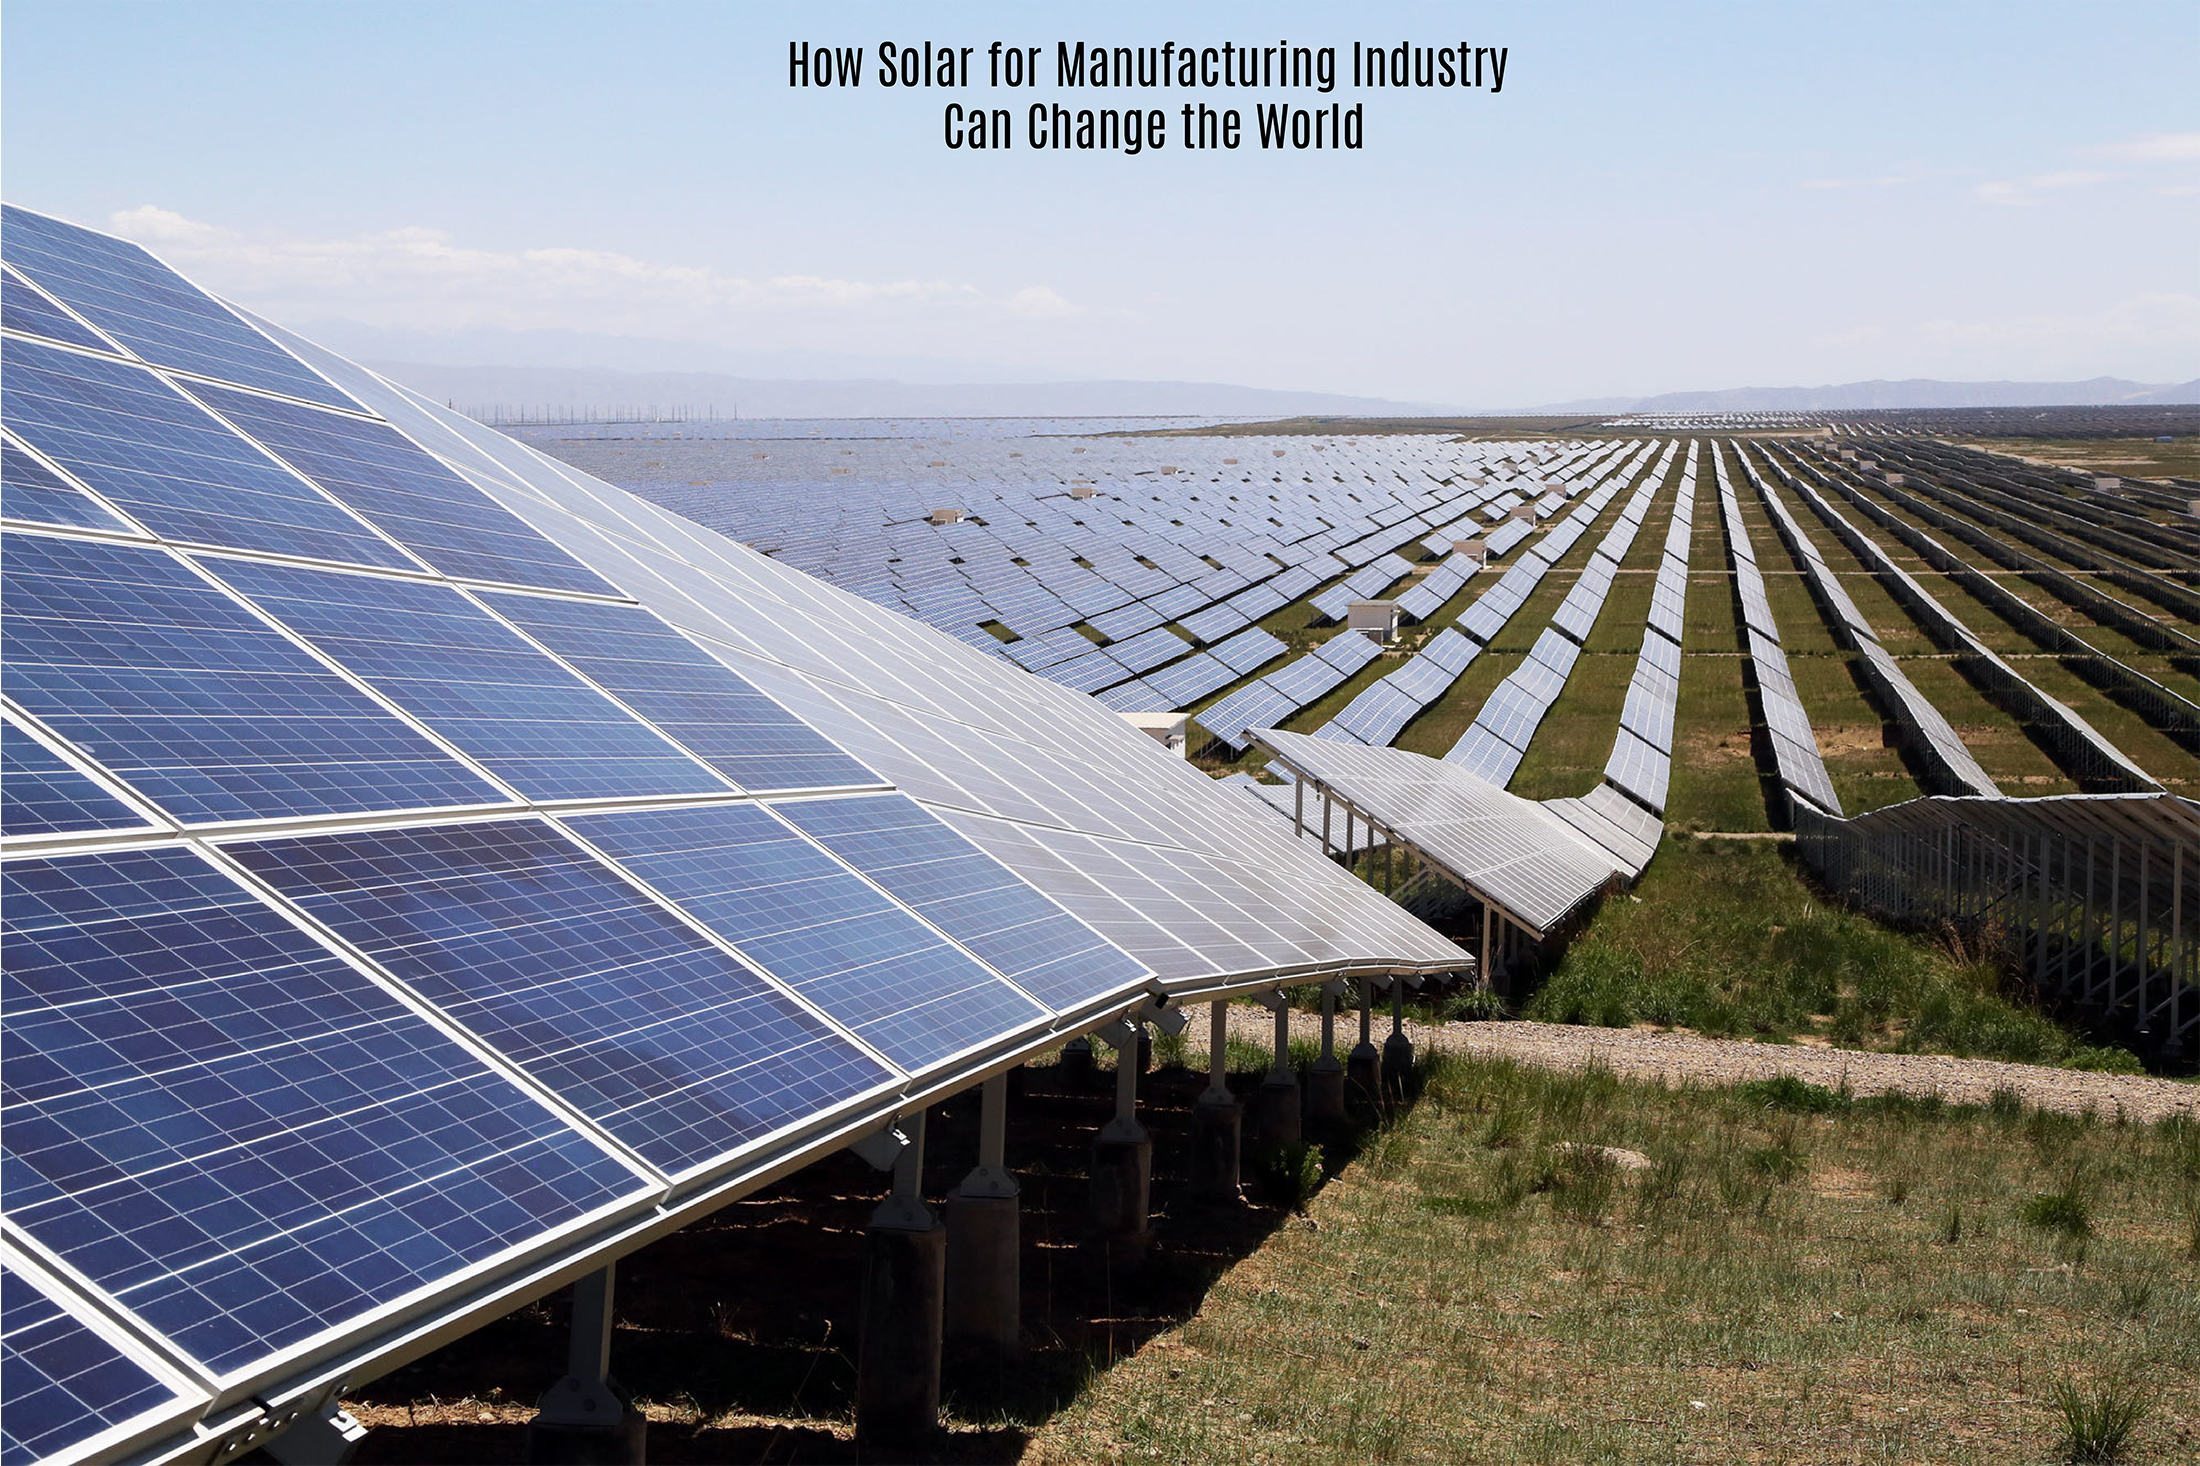 How Solar for Manufacturing Industry Can Change the World